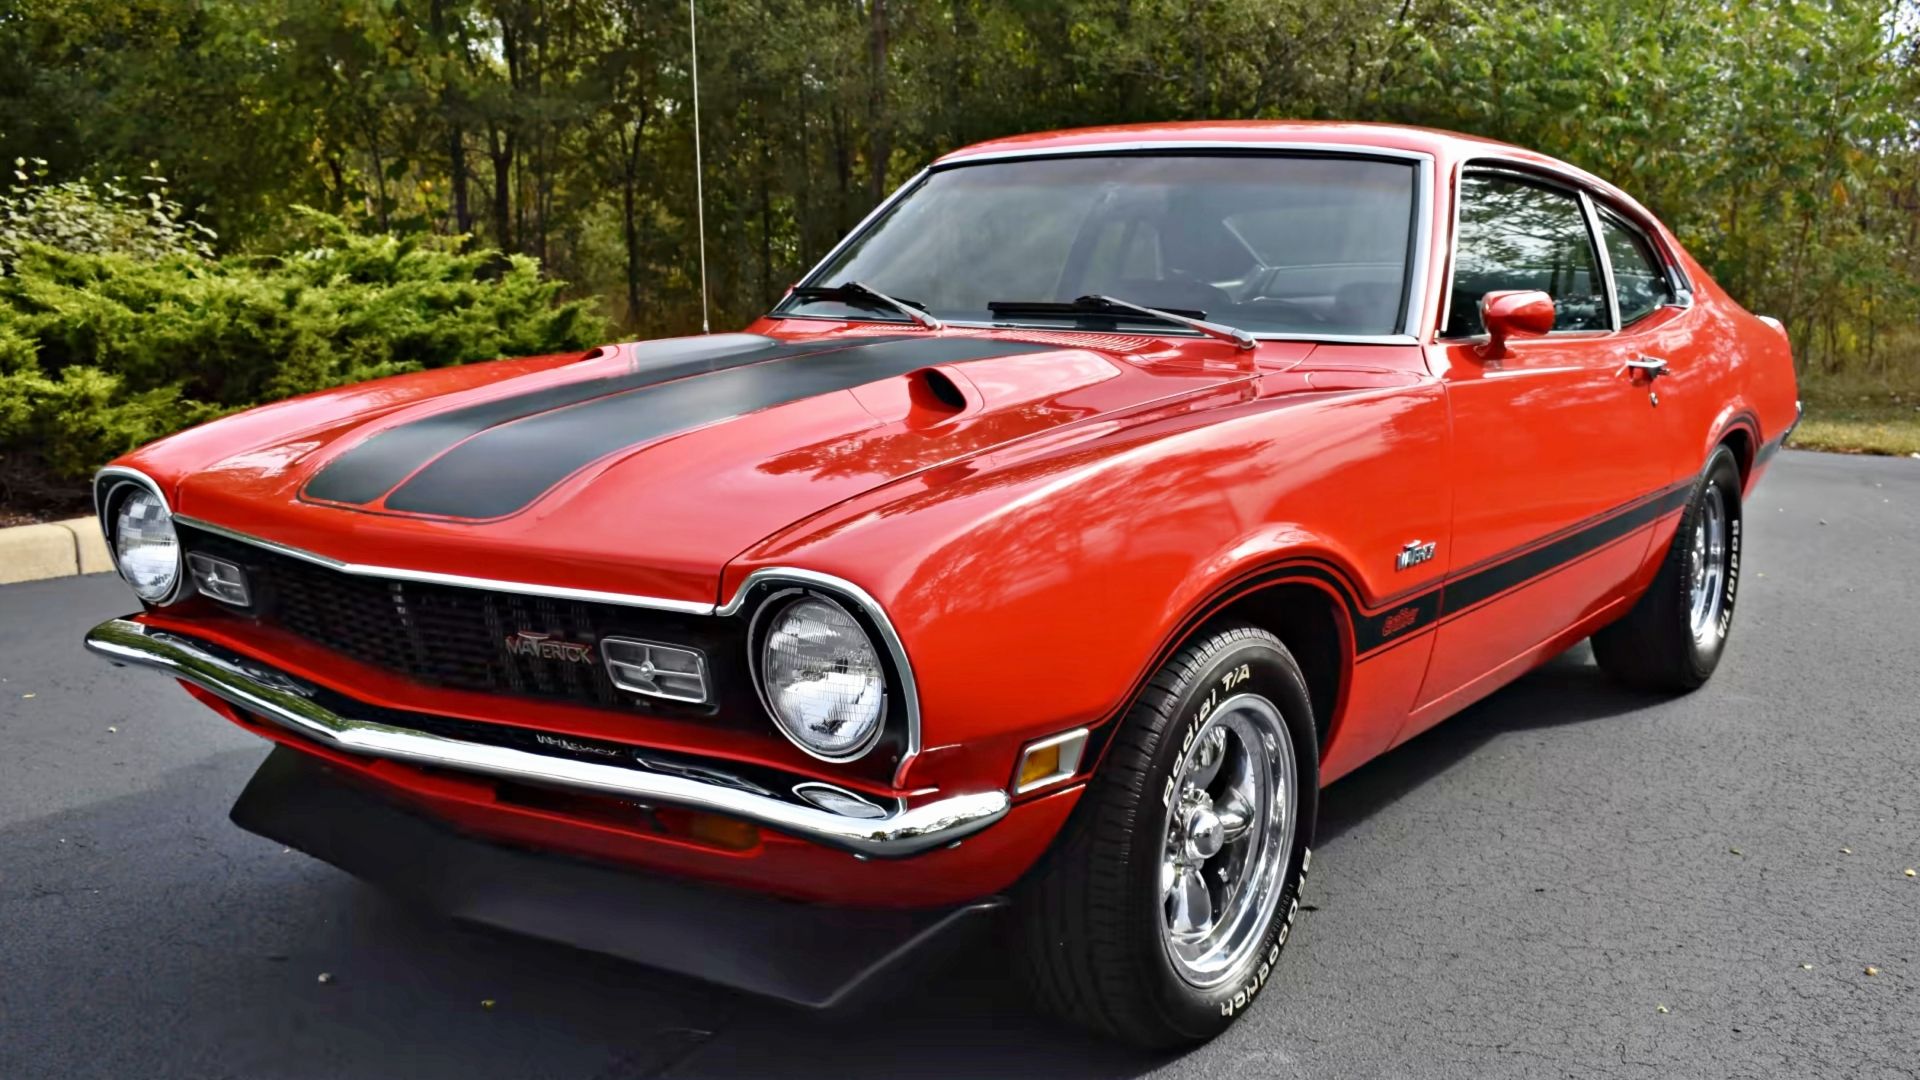 Ford Maverick wallpapers for desktop download free Ford Maverick pictures  and backgrounds for PC  moborg